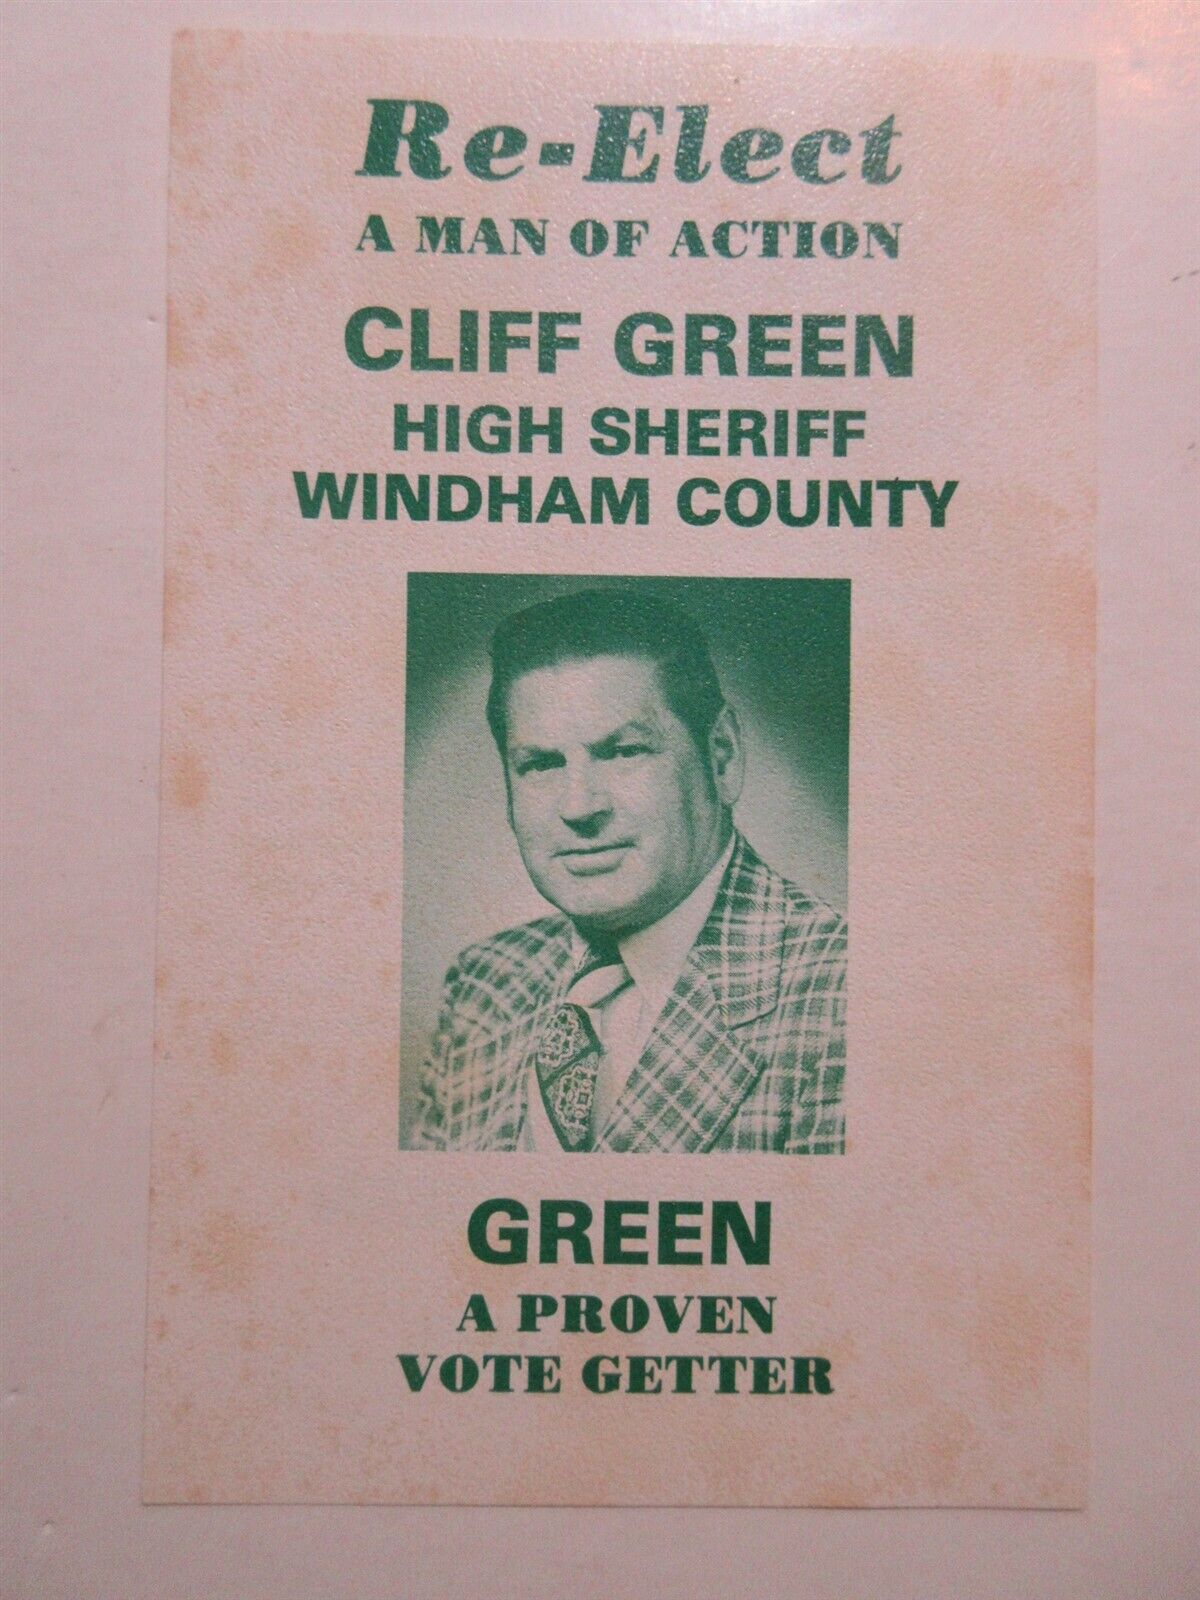 vintage Re-Elect Cliff Green High Sheriff Windham County flyer